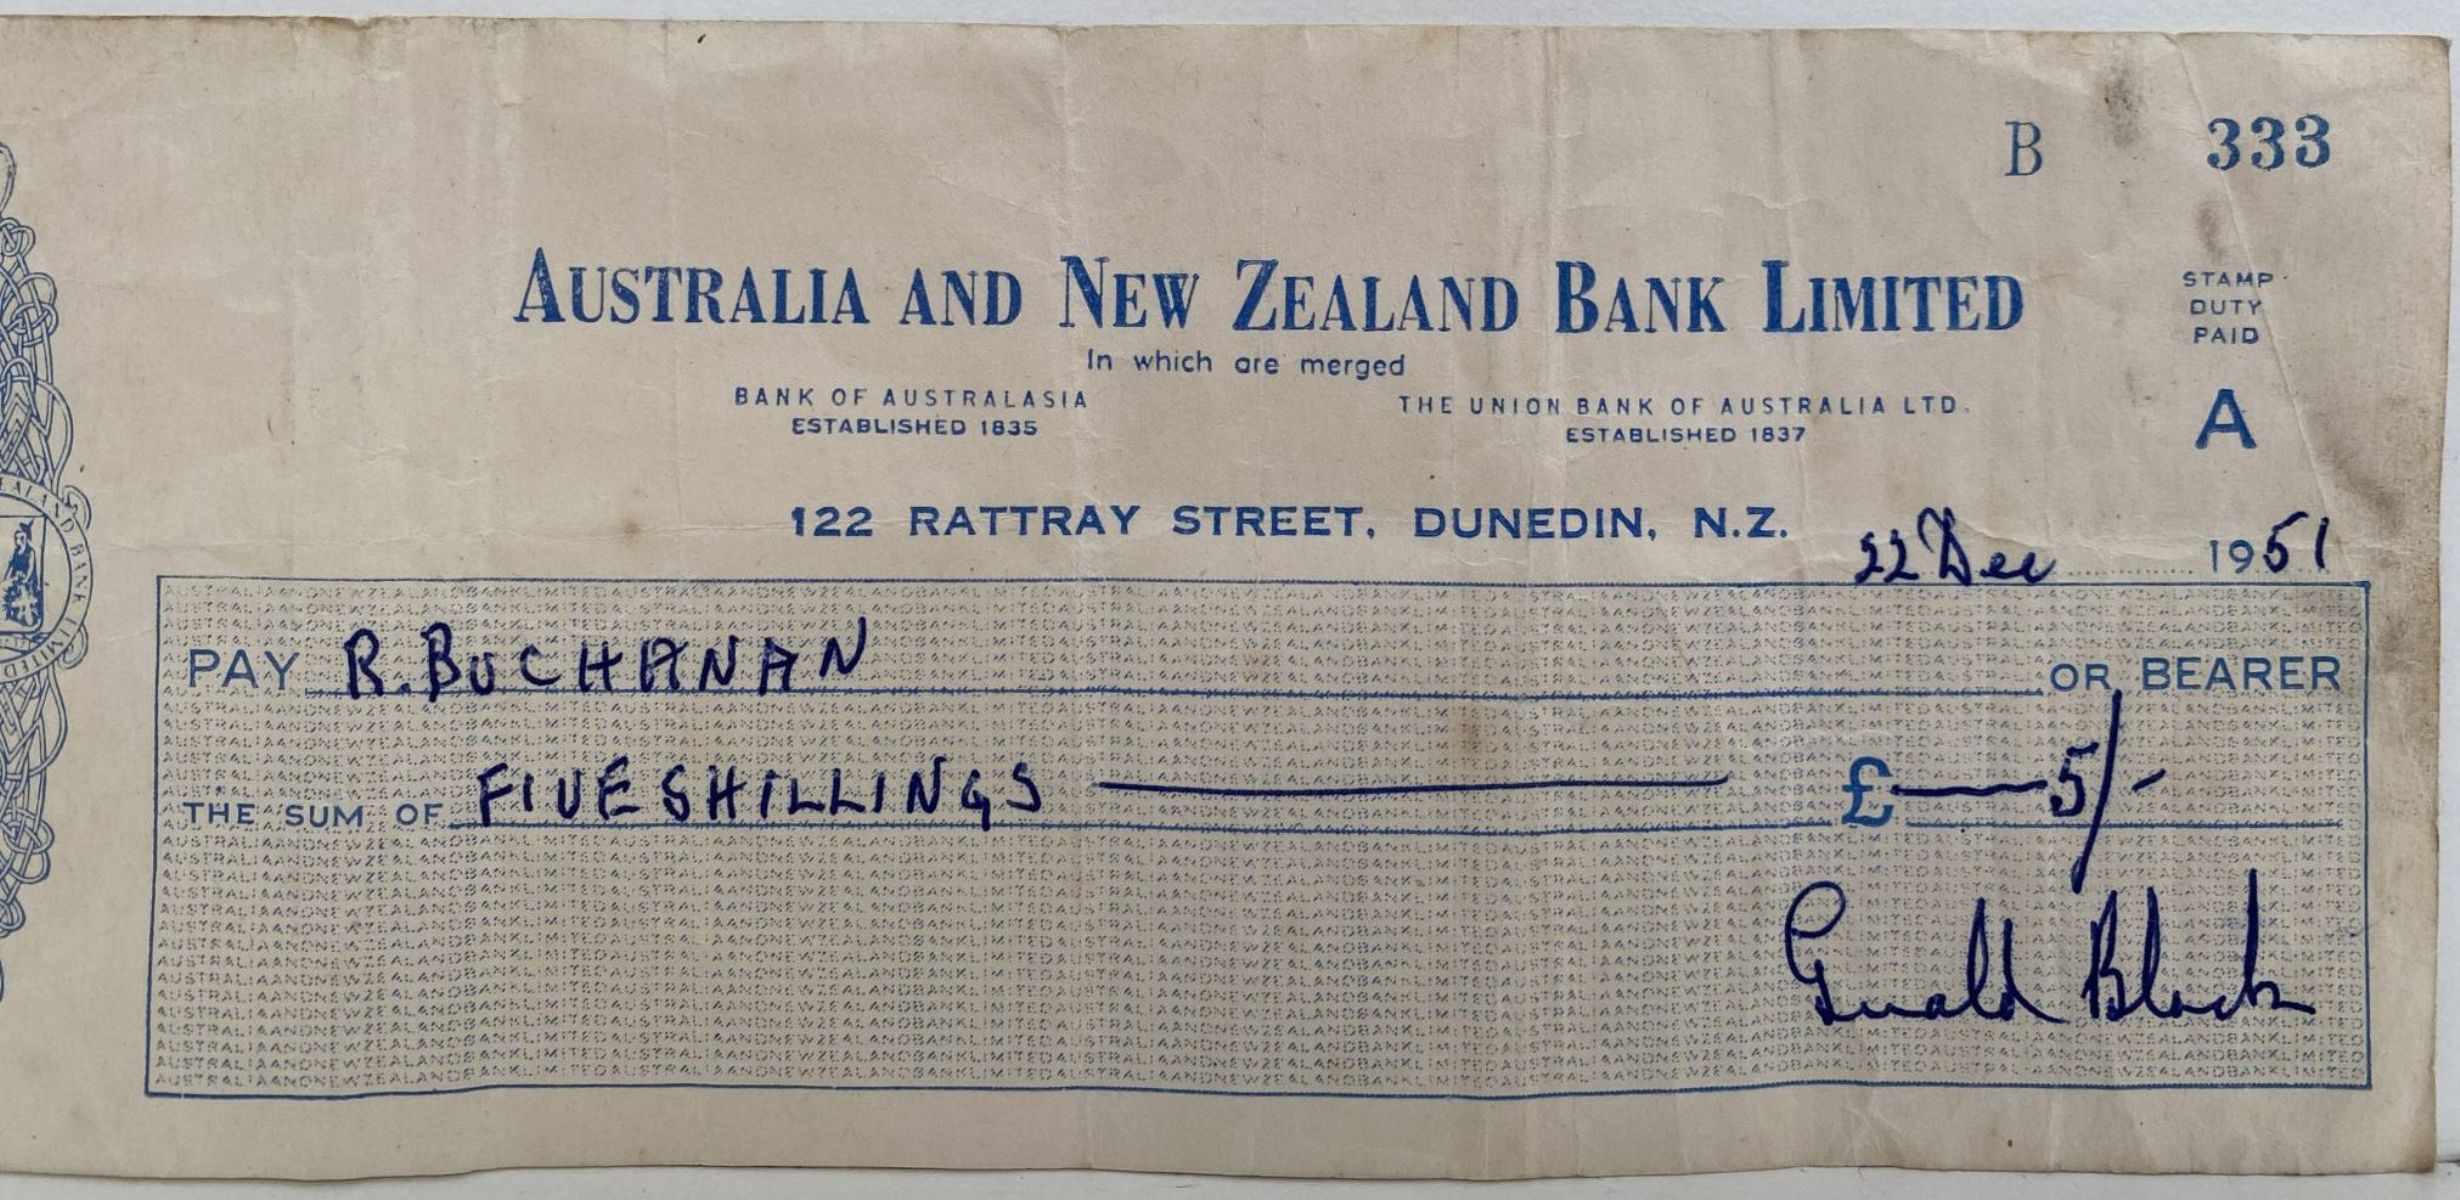 OLD BANKING MEMORABILIA: Bank cheque issued by ANZ Bank, Dunedin 1951